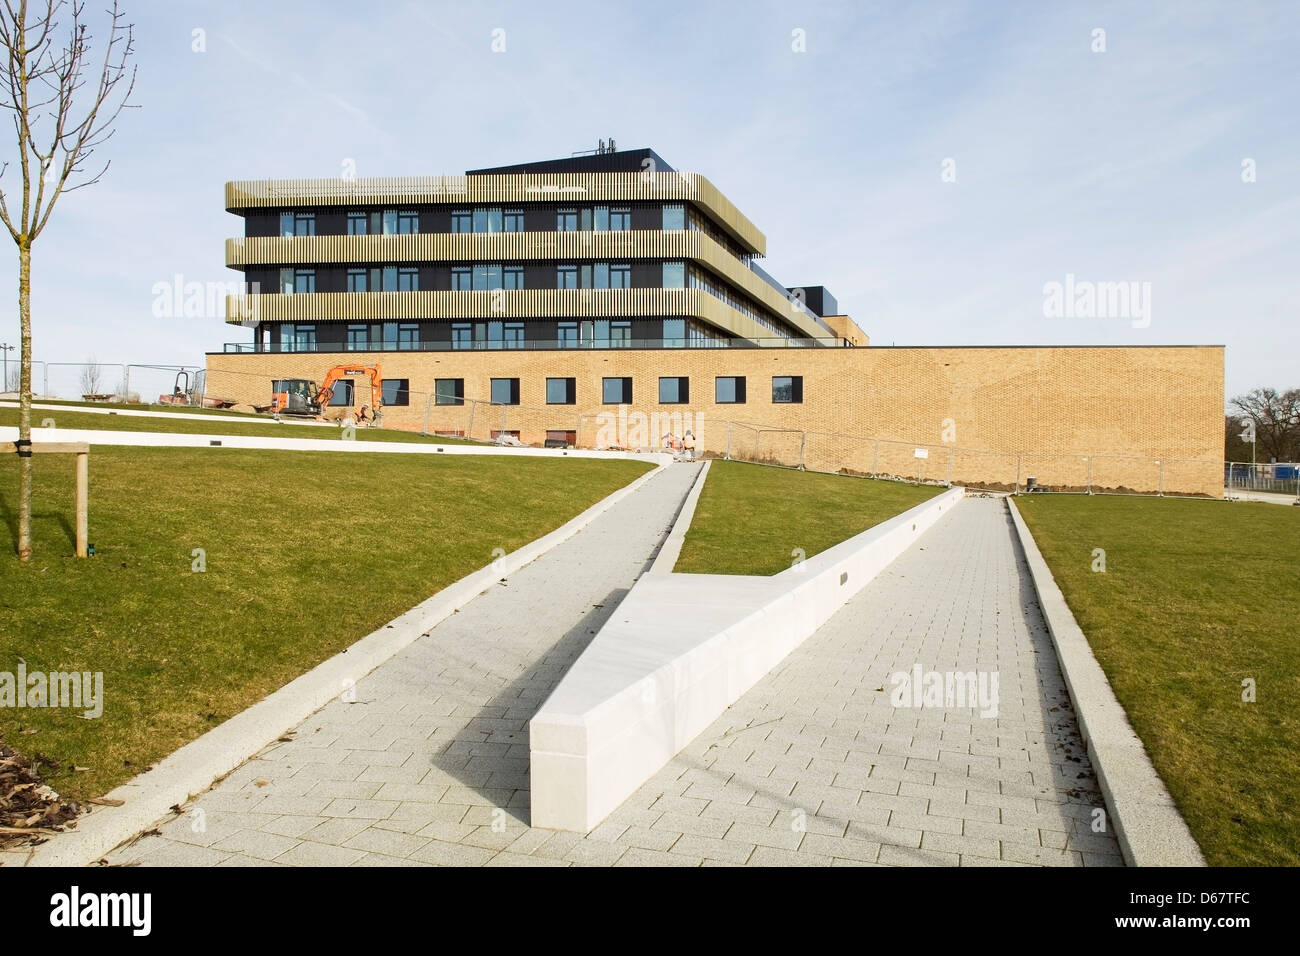 Department of Materials Science and Metallurgy Building, Cambridge, United Kingdom. Architect: NBBJ, 2013. Wide view of west fac Stock Photo